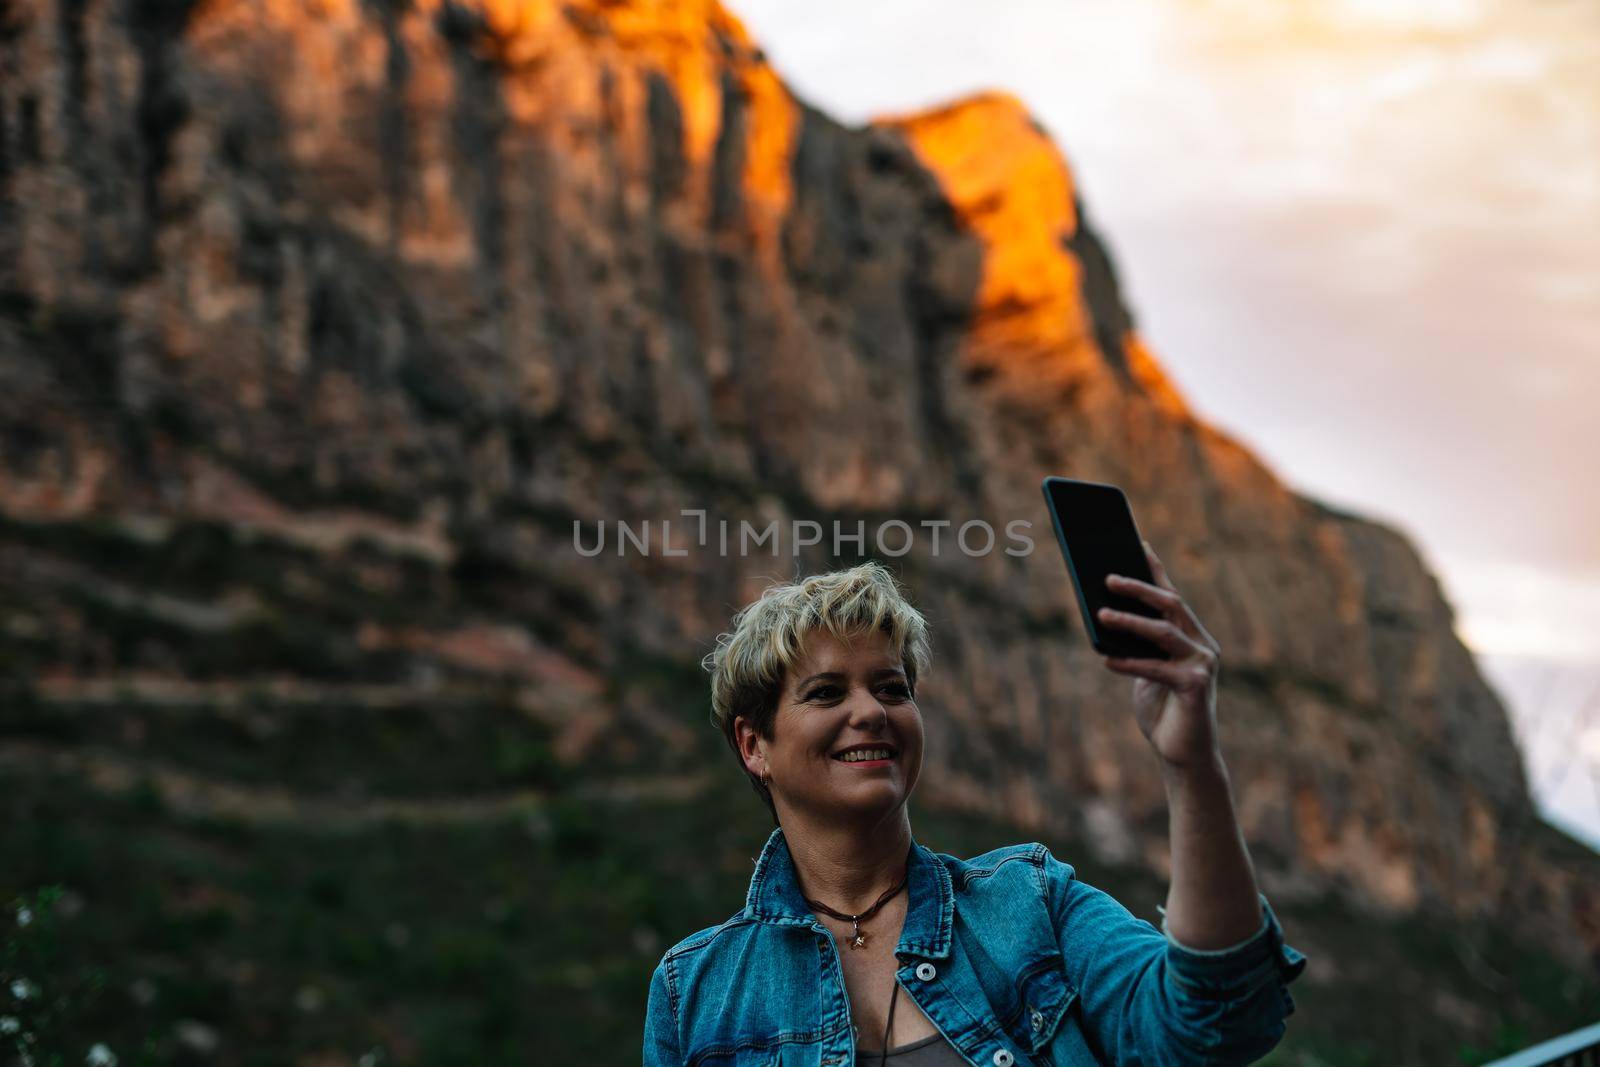 Portrait of an adult blonde short haired modern woman, smiling and happy, casually dressed, wearing a blue denim jacket, taking a selfie on holiday. Warm and calm atmosphere with sunset light, background of mountains and forests, blue sky with big clouds.